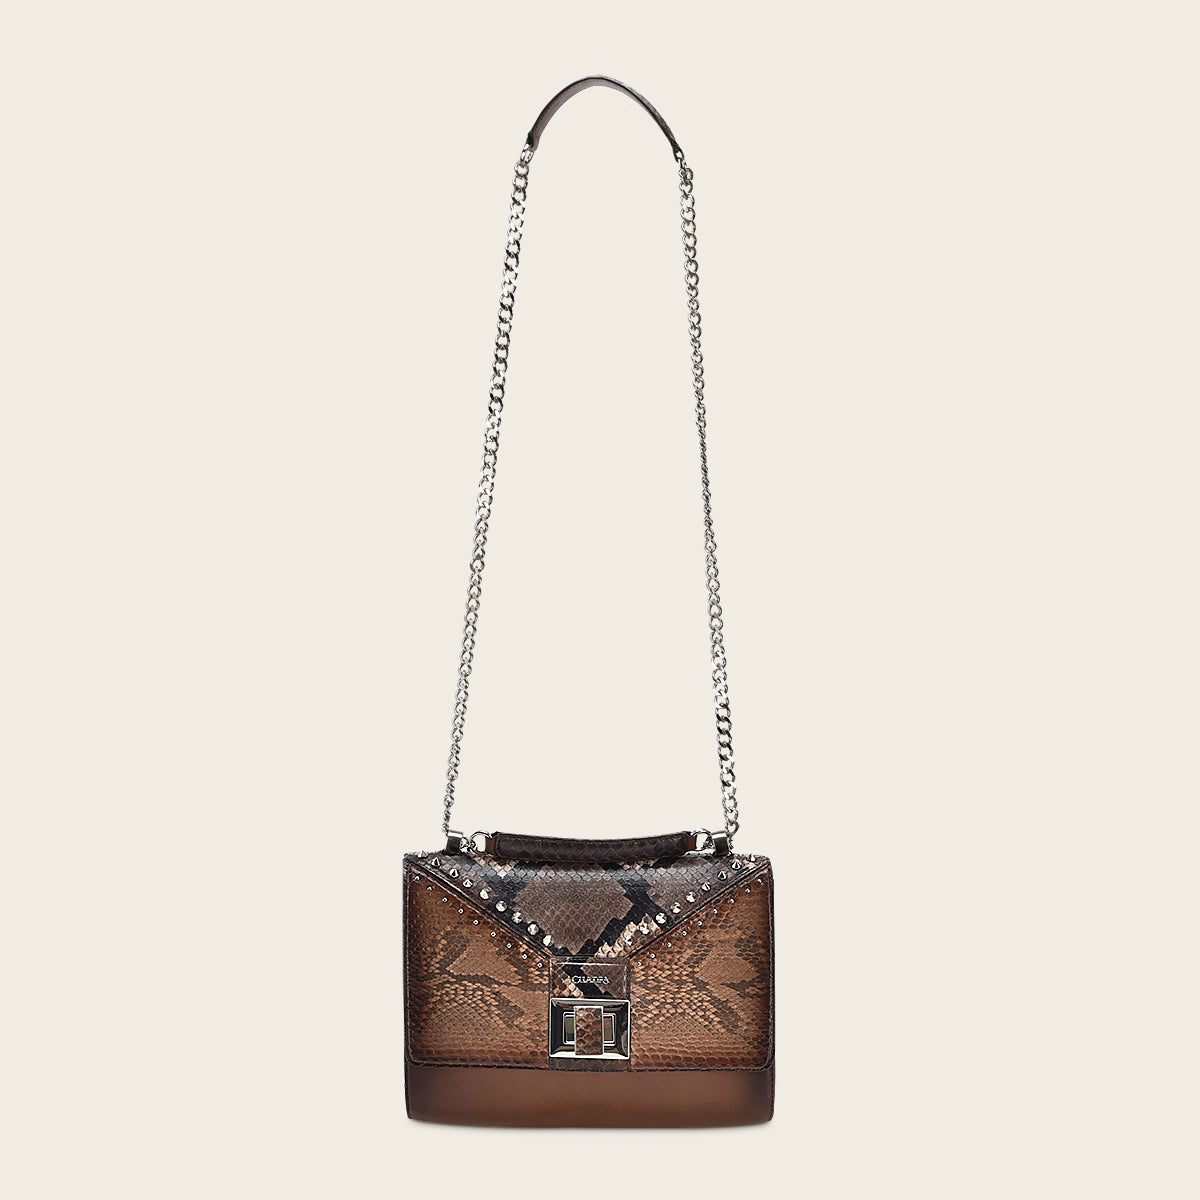 Honey brown genuine exotic leather handbag with chain strap